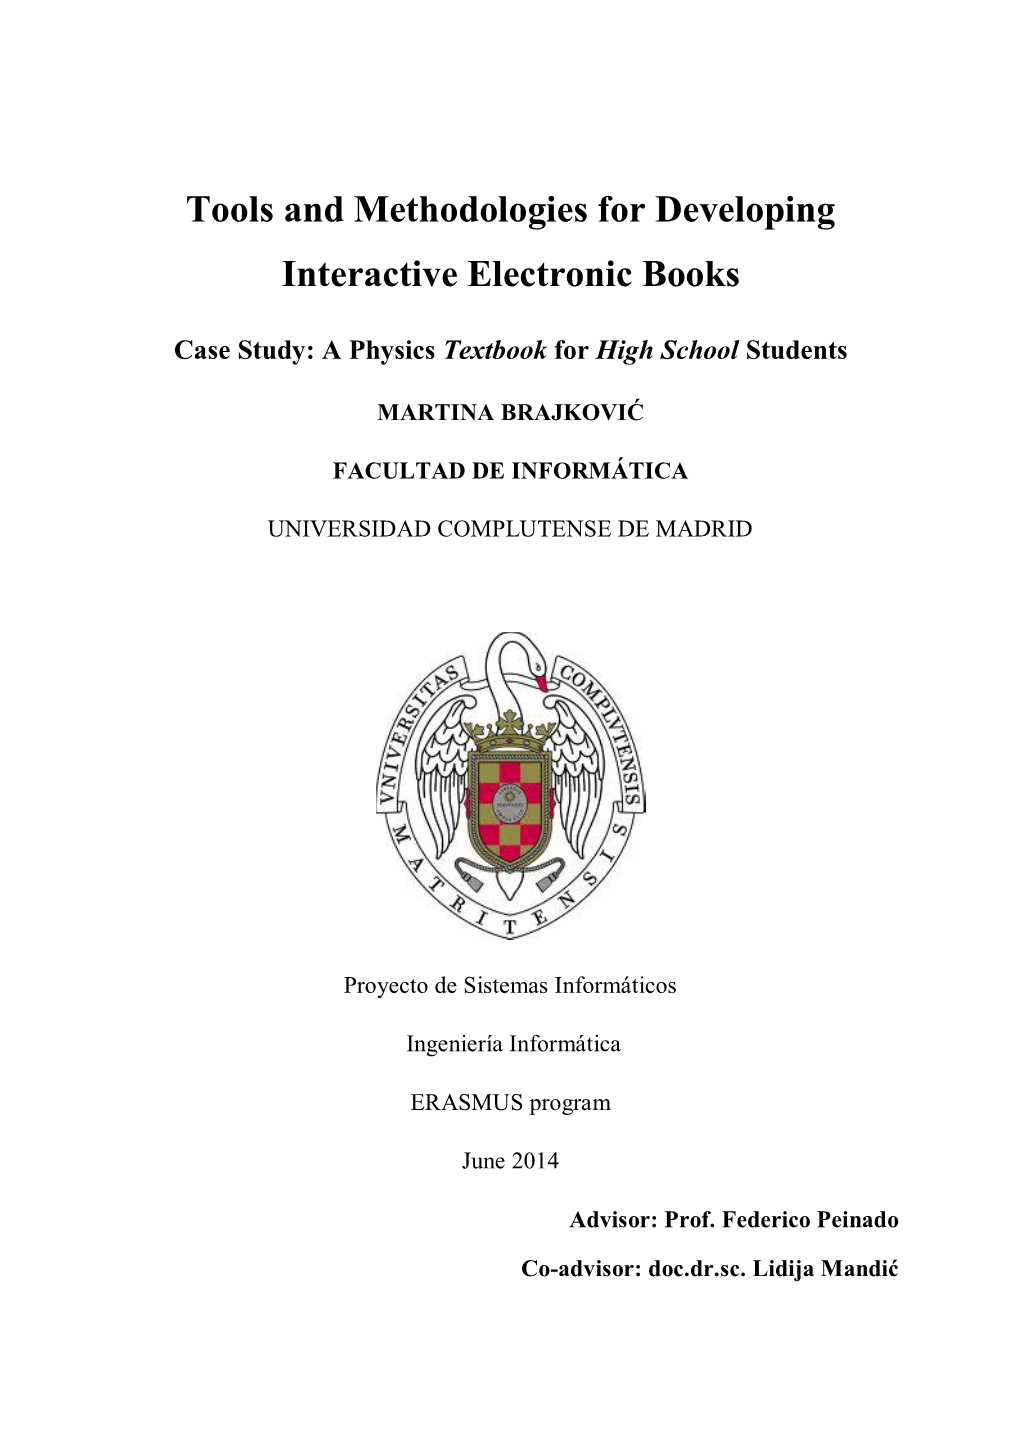 Tools and Methodologies for Developing Interactive Electronic Books